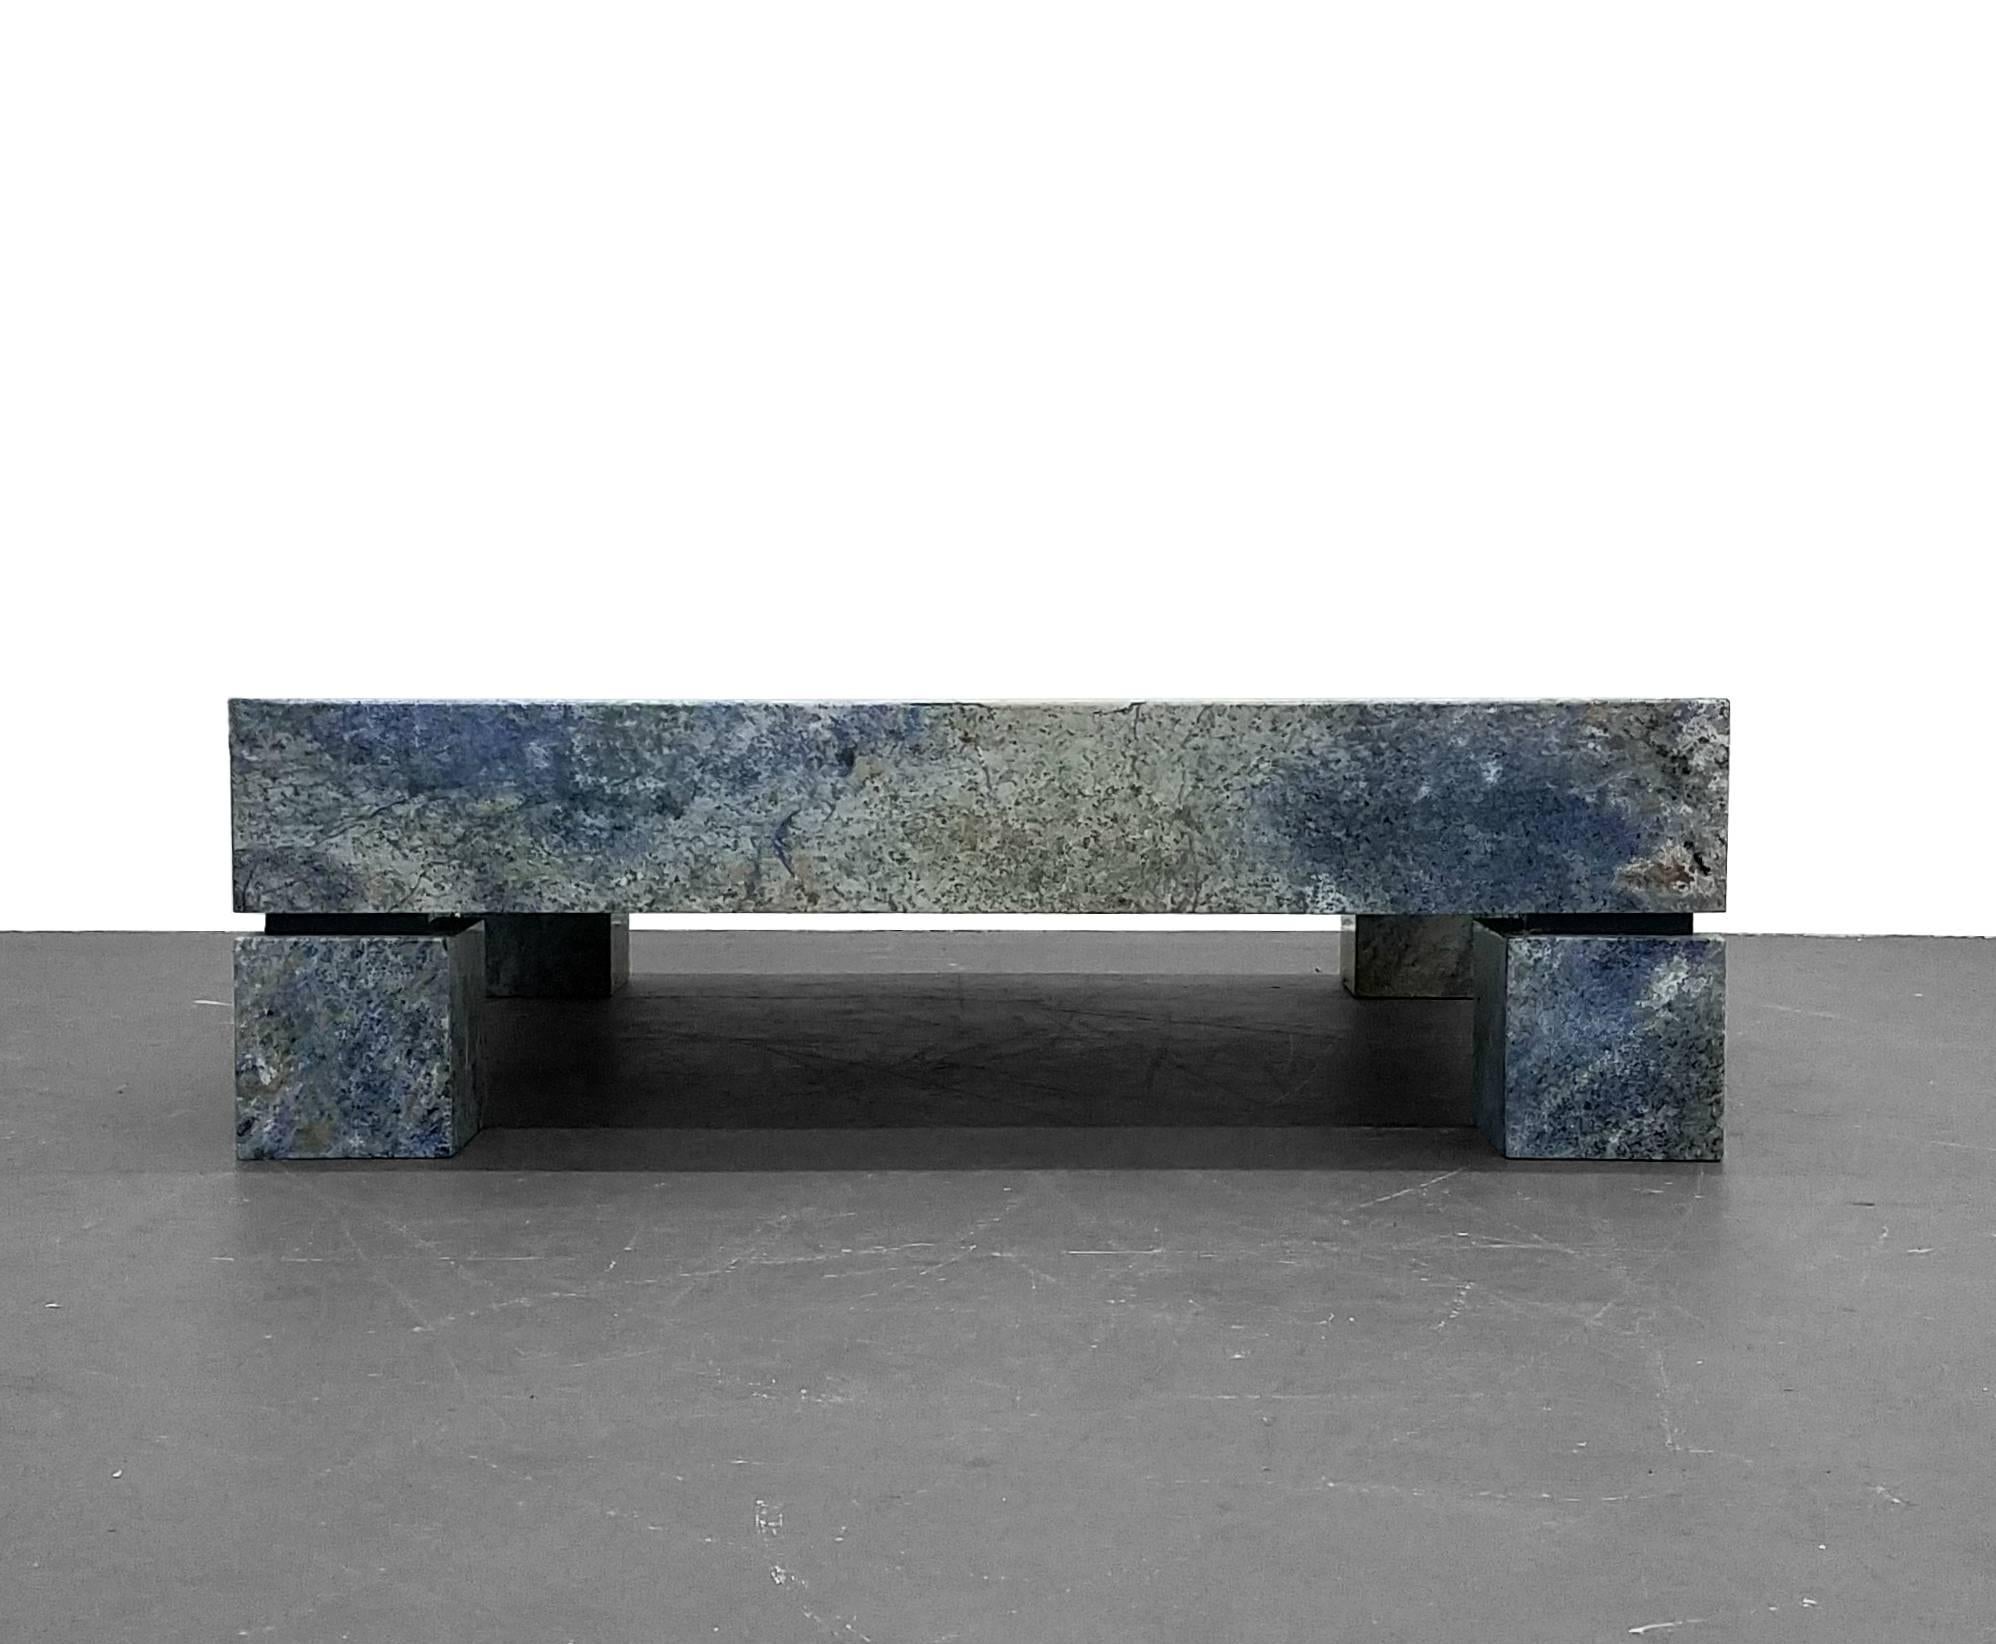 Beautiful square granite coffee table. Features gorgeous shades of blue and green. A designers dream.

Would make the perfect meditation table.